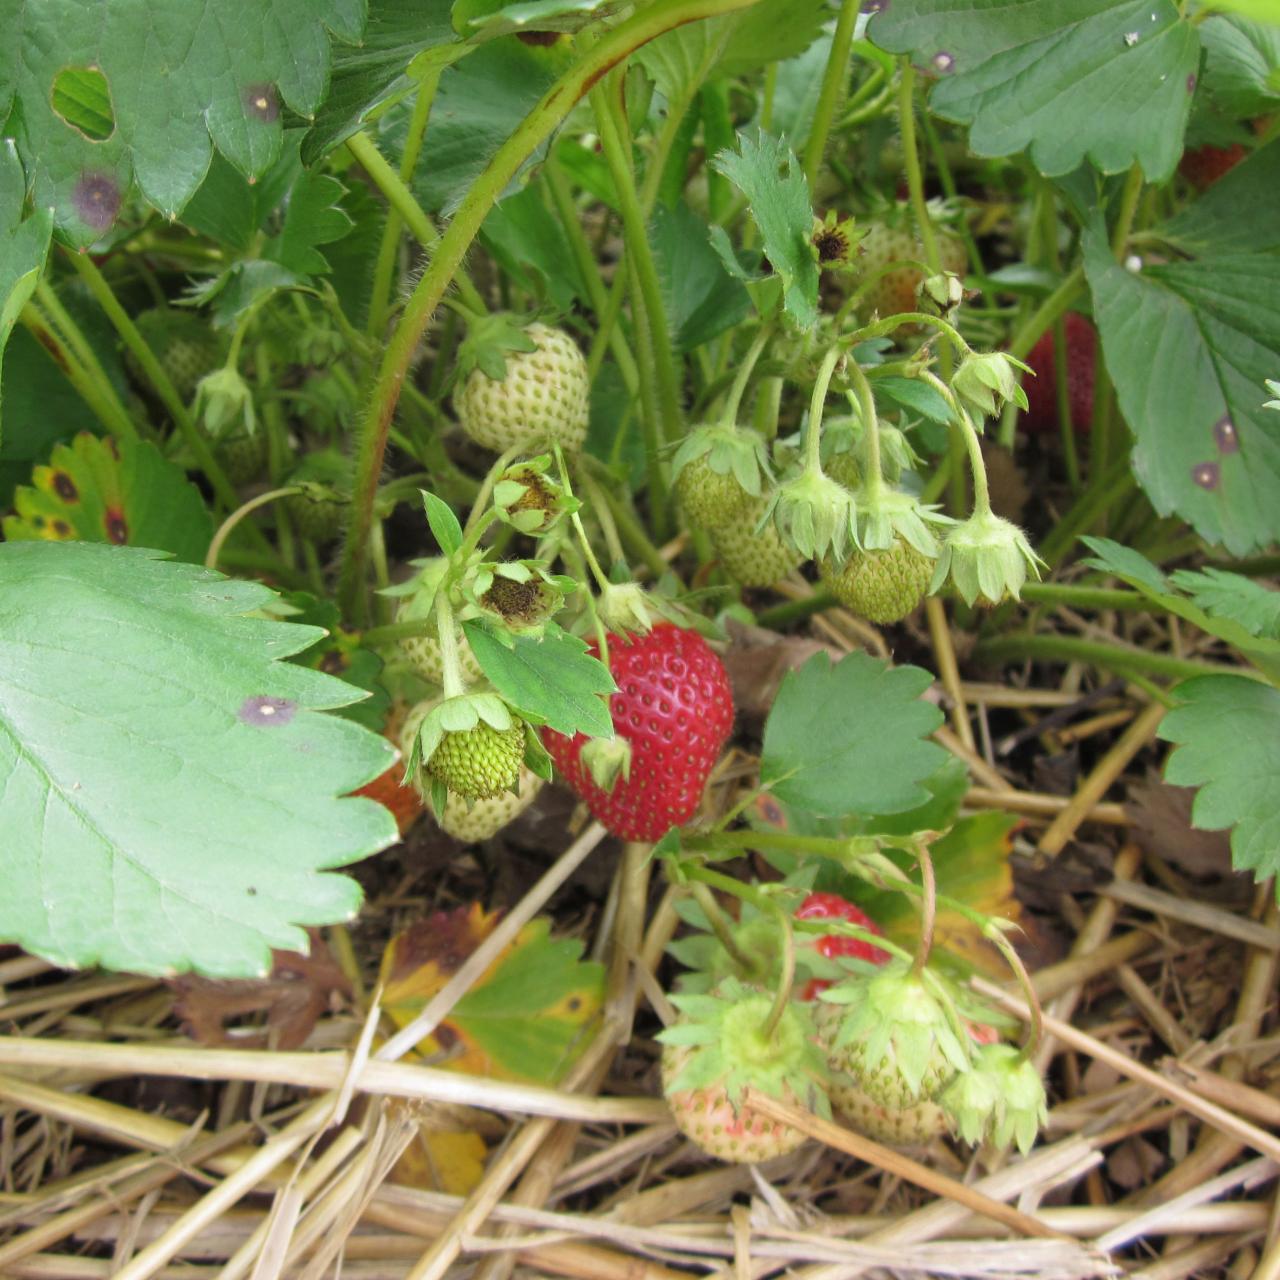 Buy Strawberry Island Truly Live Plants Products Online